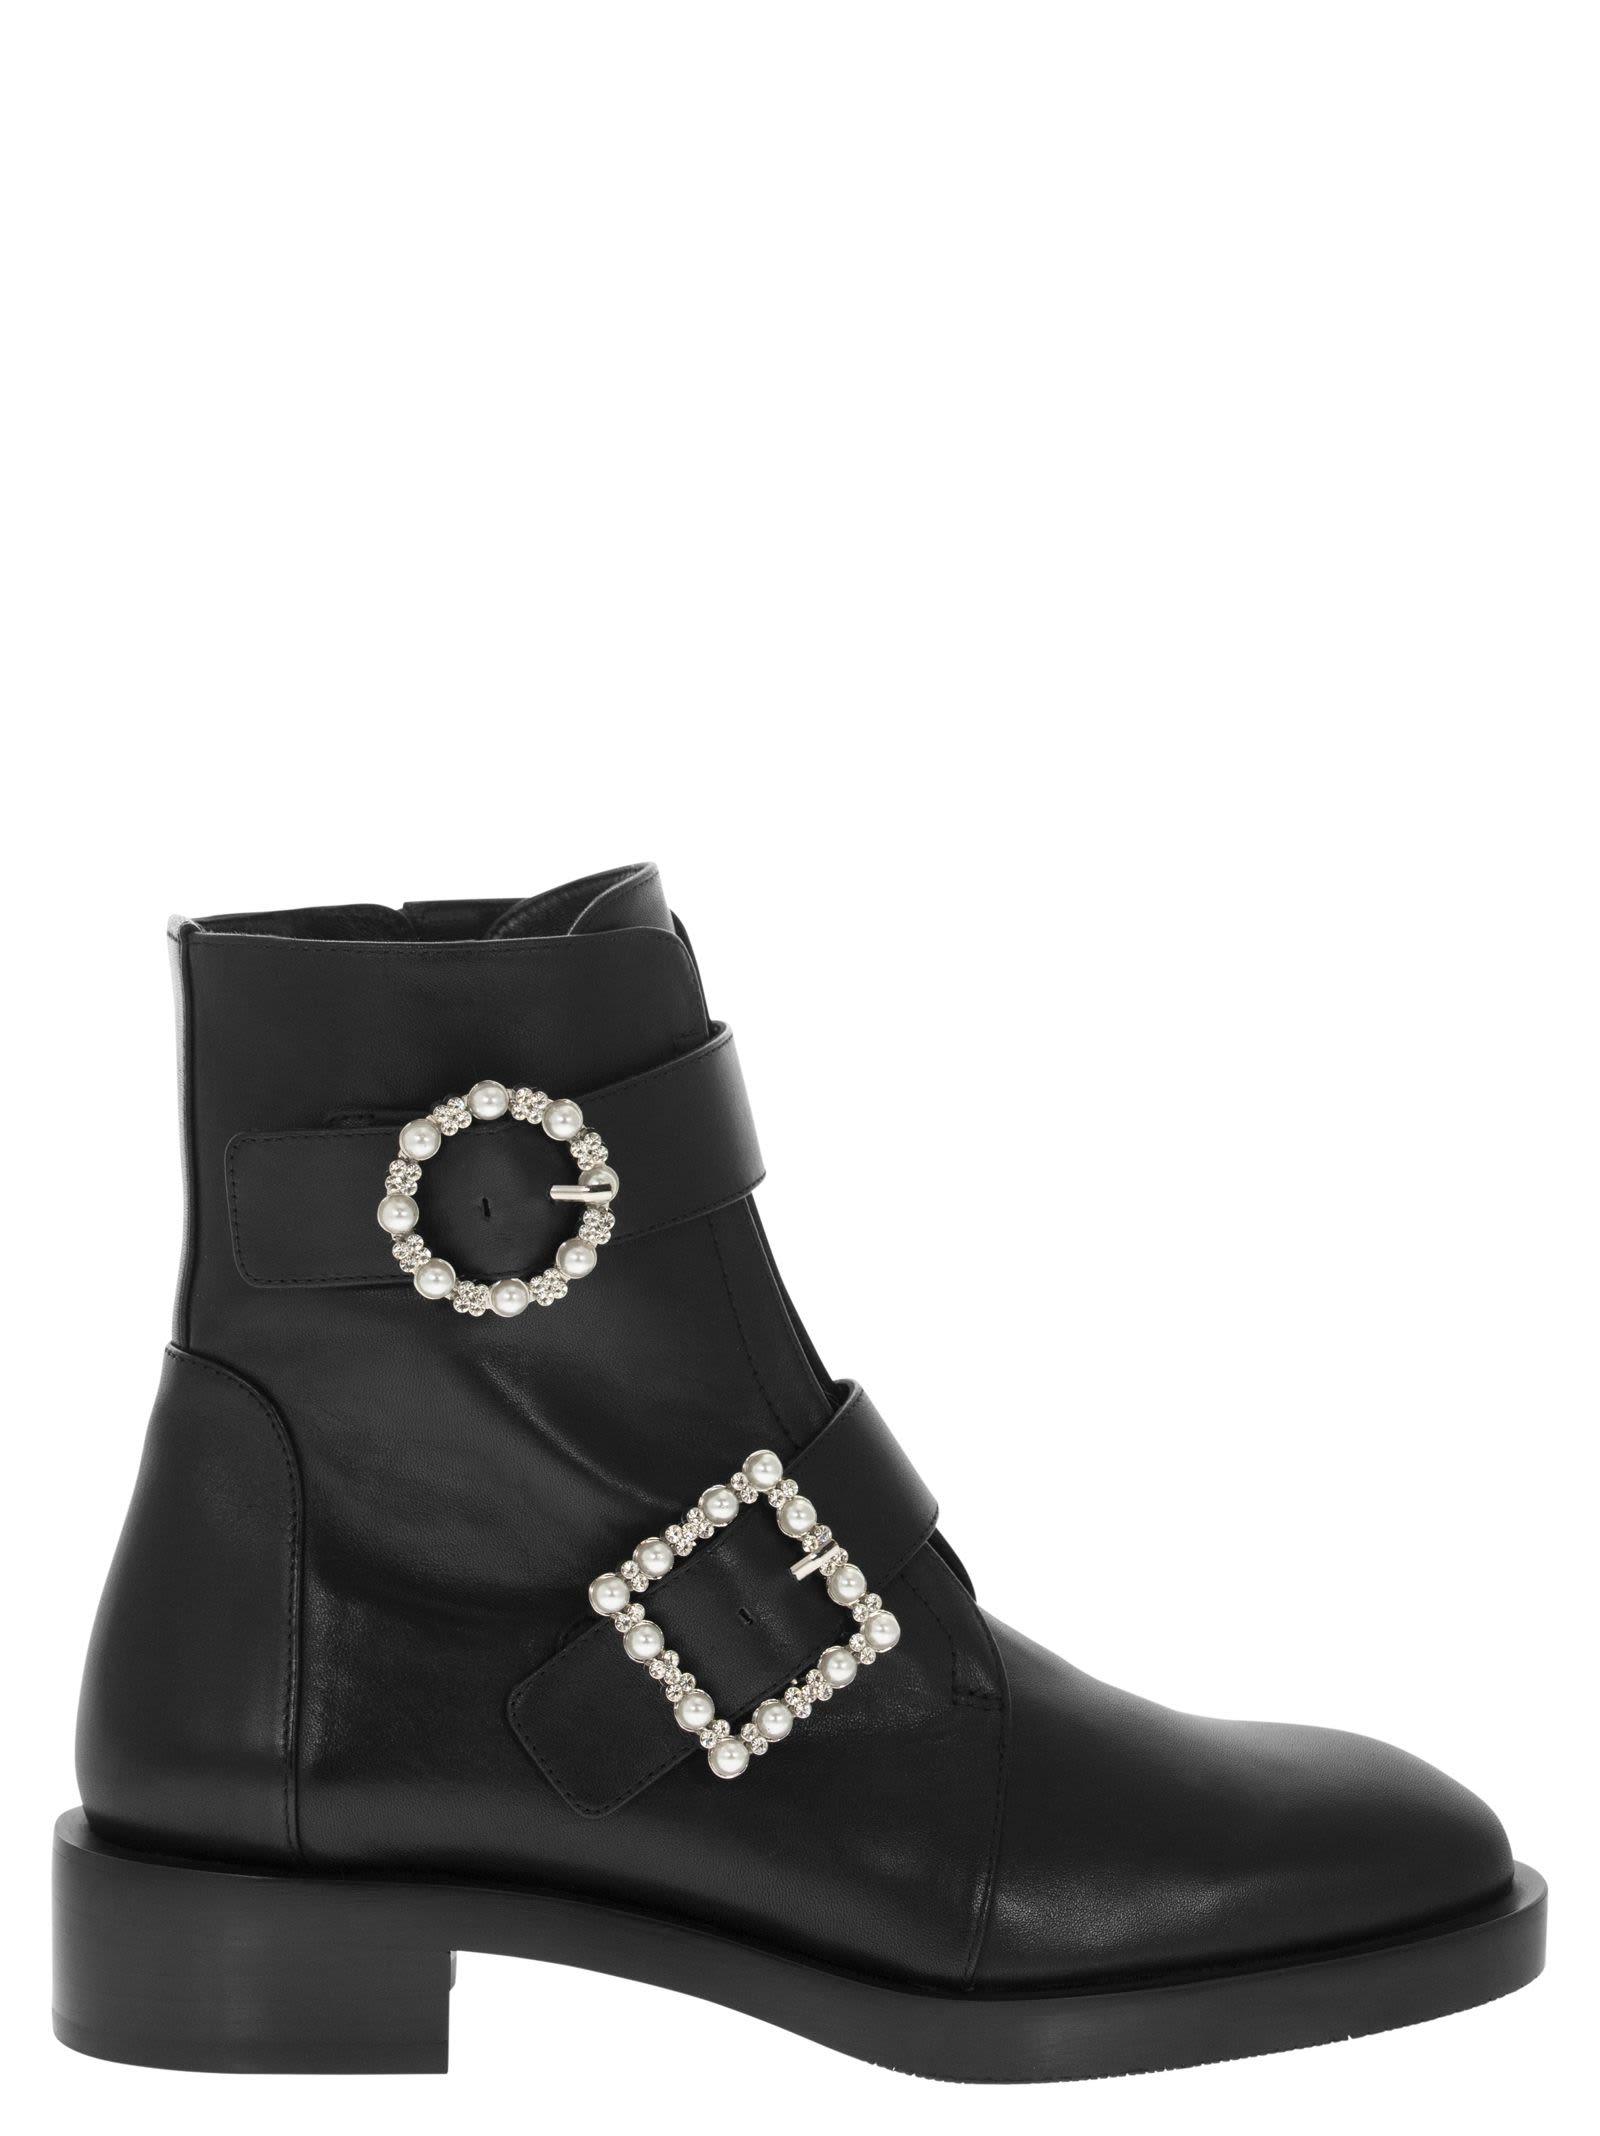 Stuart Weitzman Ryder Pearl Geo - Ankle Boot With Buckles in Black | Lyst